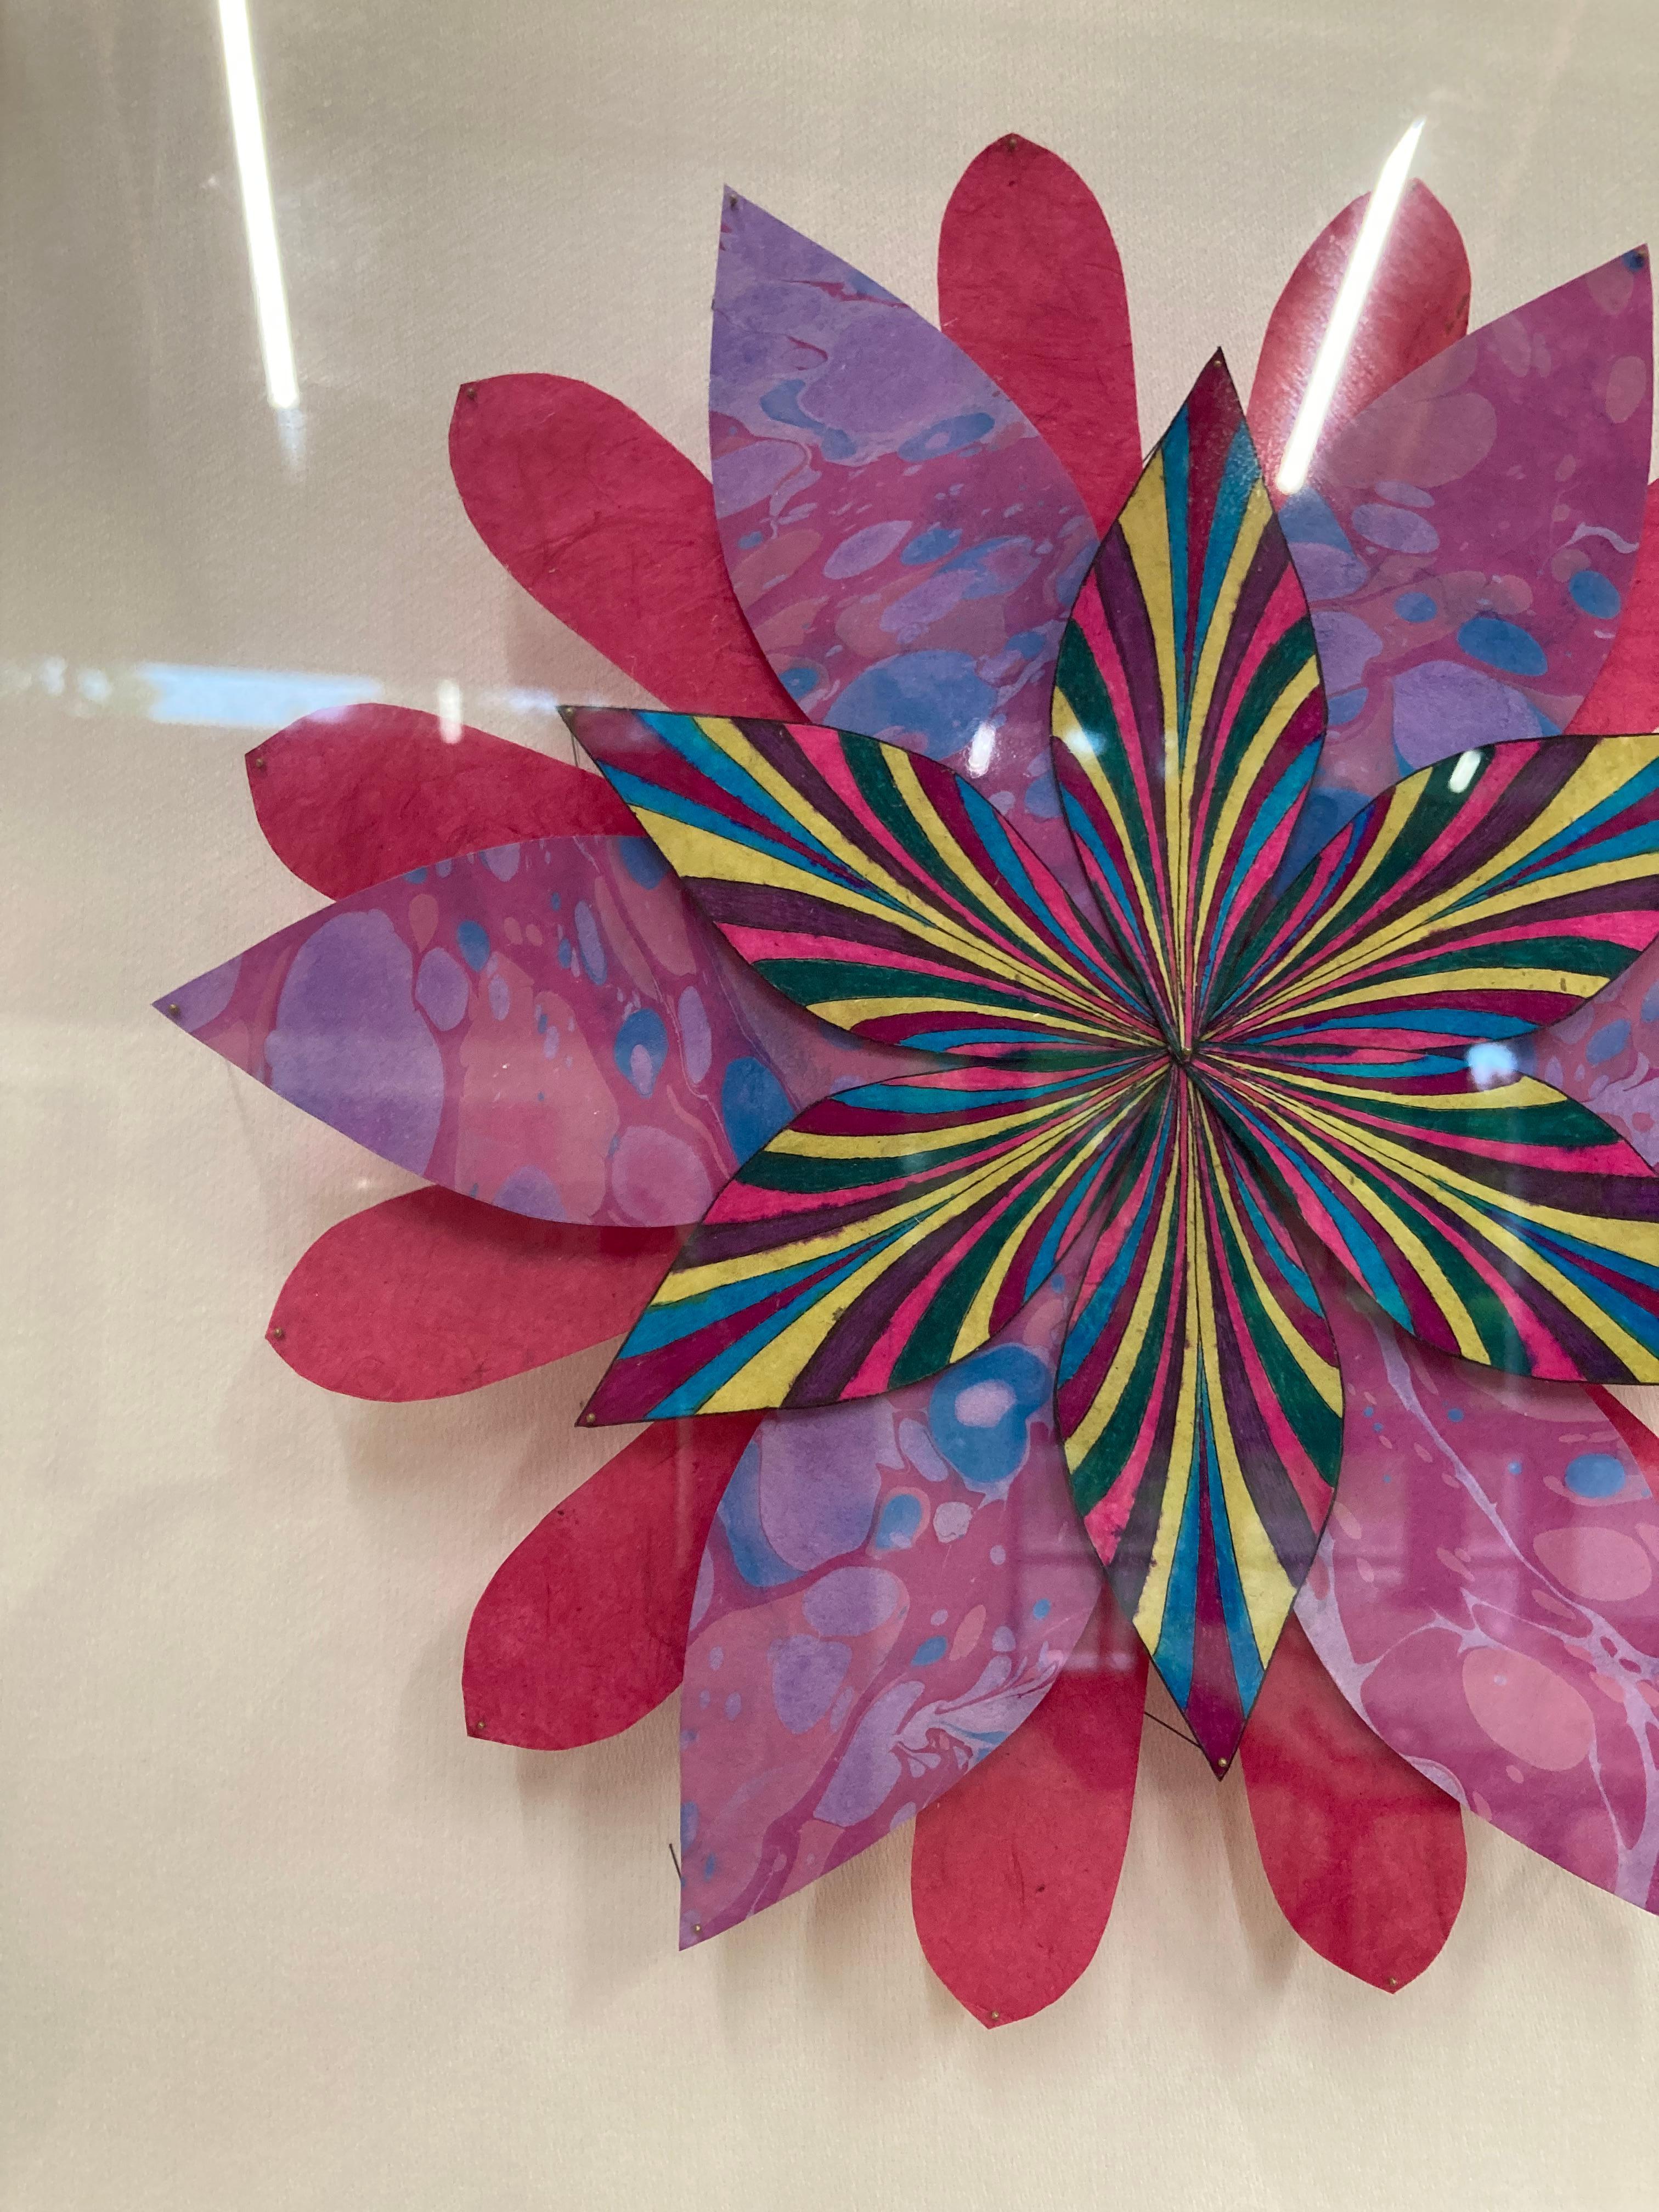 In this bright and colorful paper sculpture, a fantastical botanical form in vibrant magenta purple and marbled pink and blue is composed of hand-colored etchings on hand-cut handmade Loktah paper chine colléd to Rives lightweight paper, hand-cut